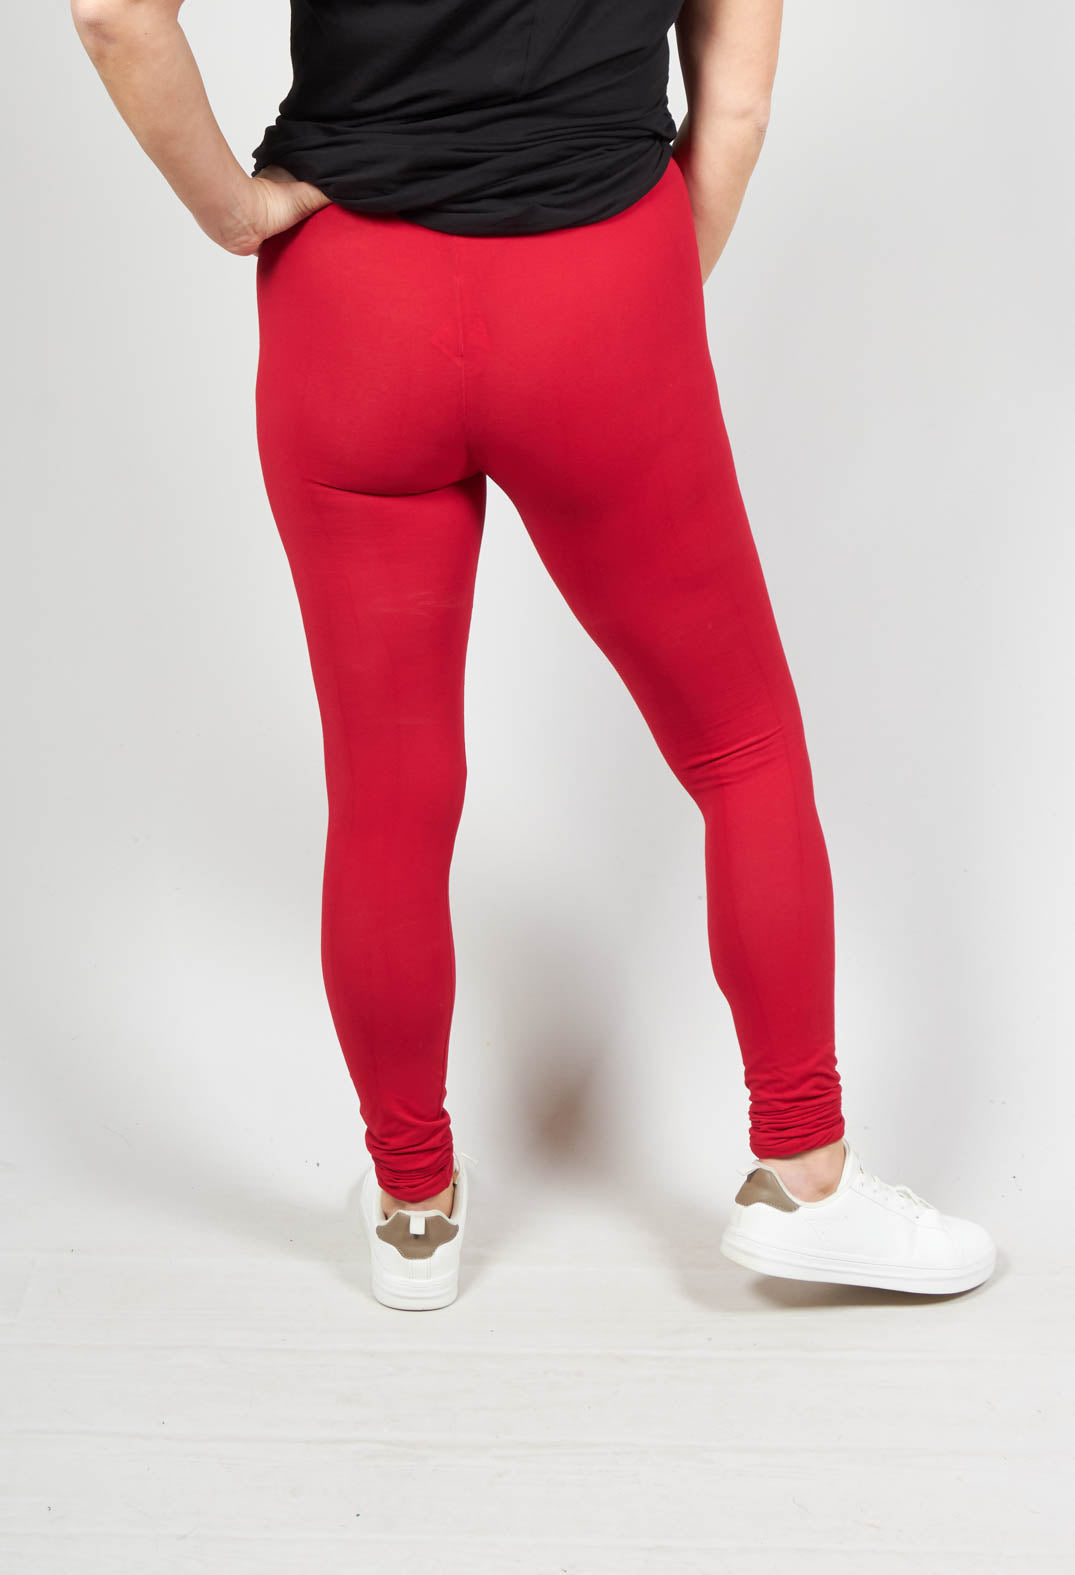 behind shot of female wearing red leggings with an elasticated waist